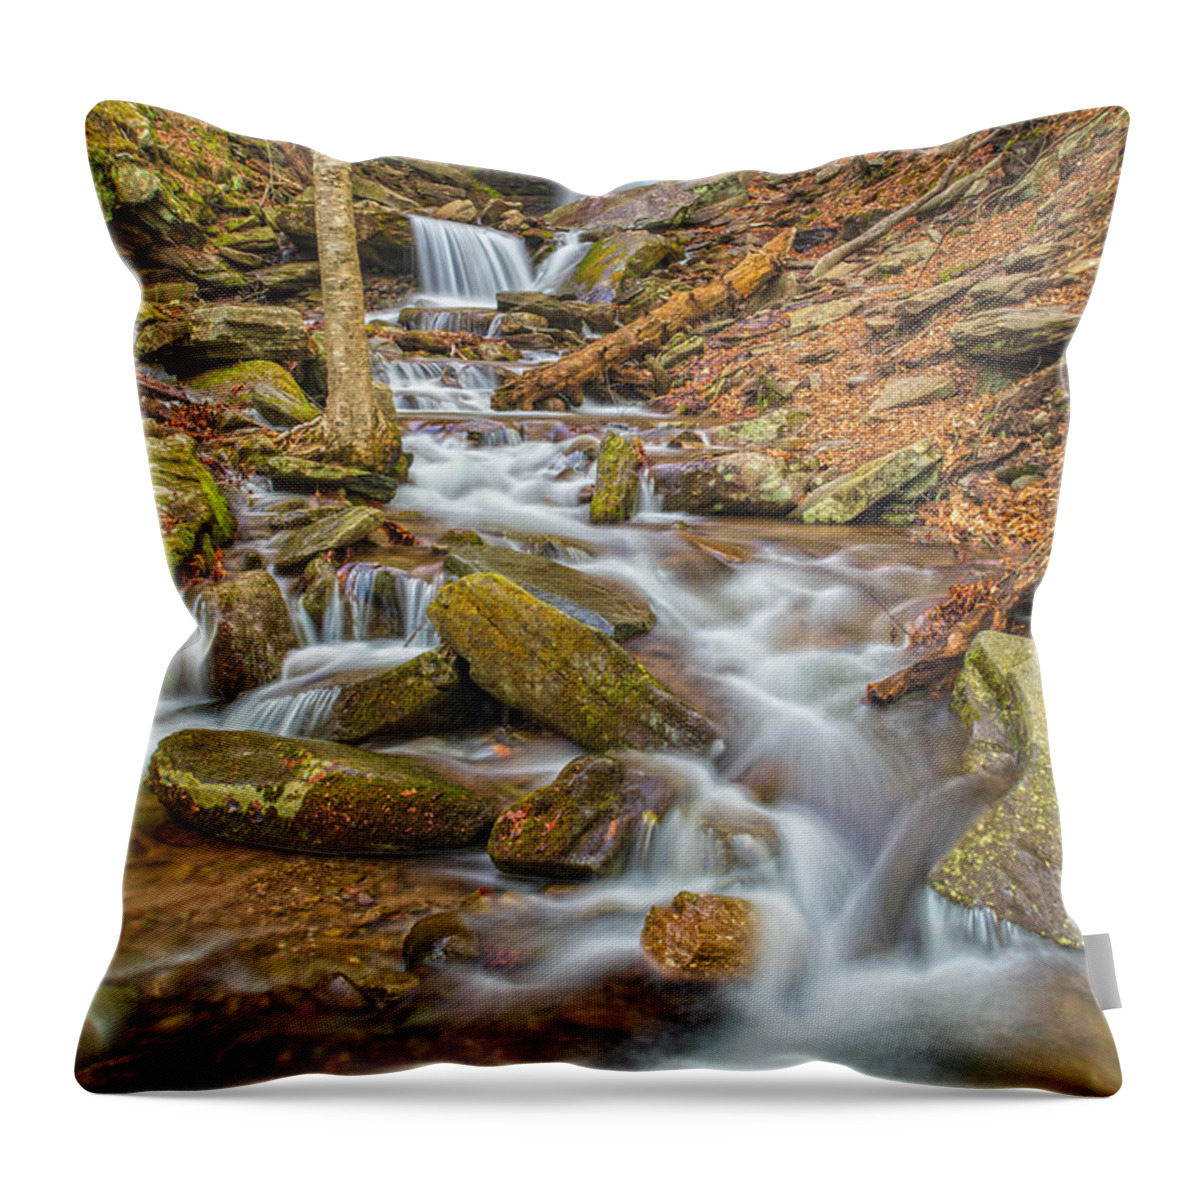 Buttermilk Falls Throw Pillow featuring the photograph Buttermilk Falls In Early Spring by Angelo Marcialis